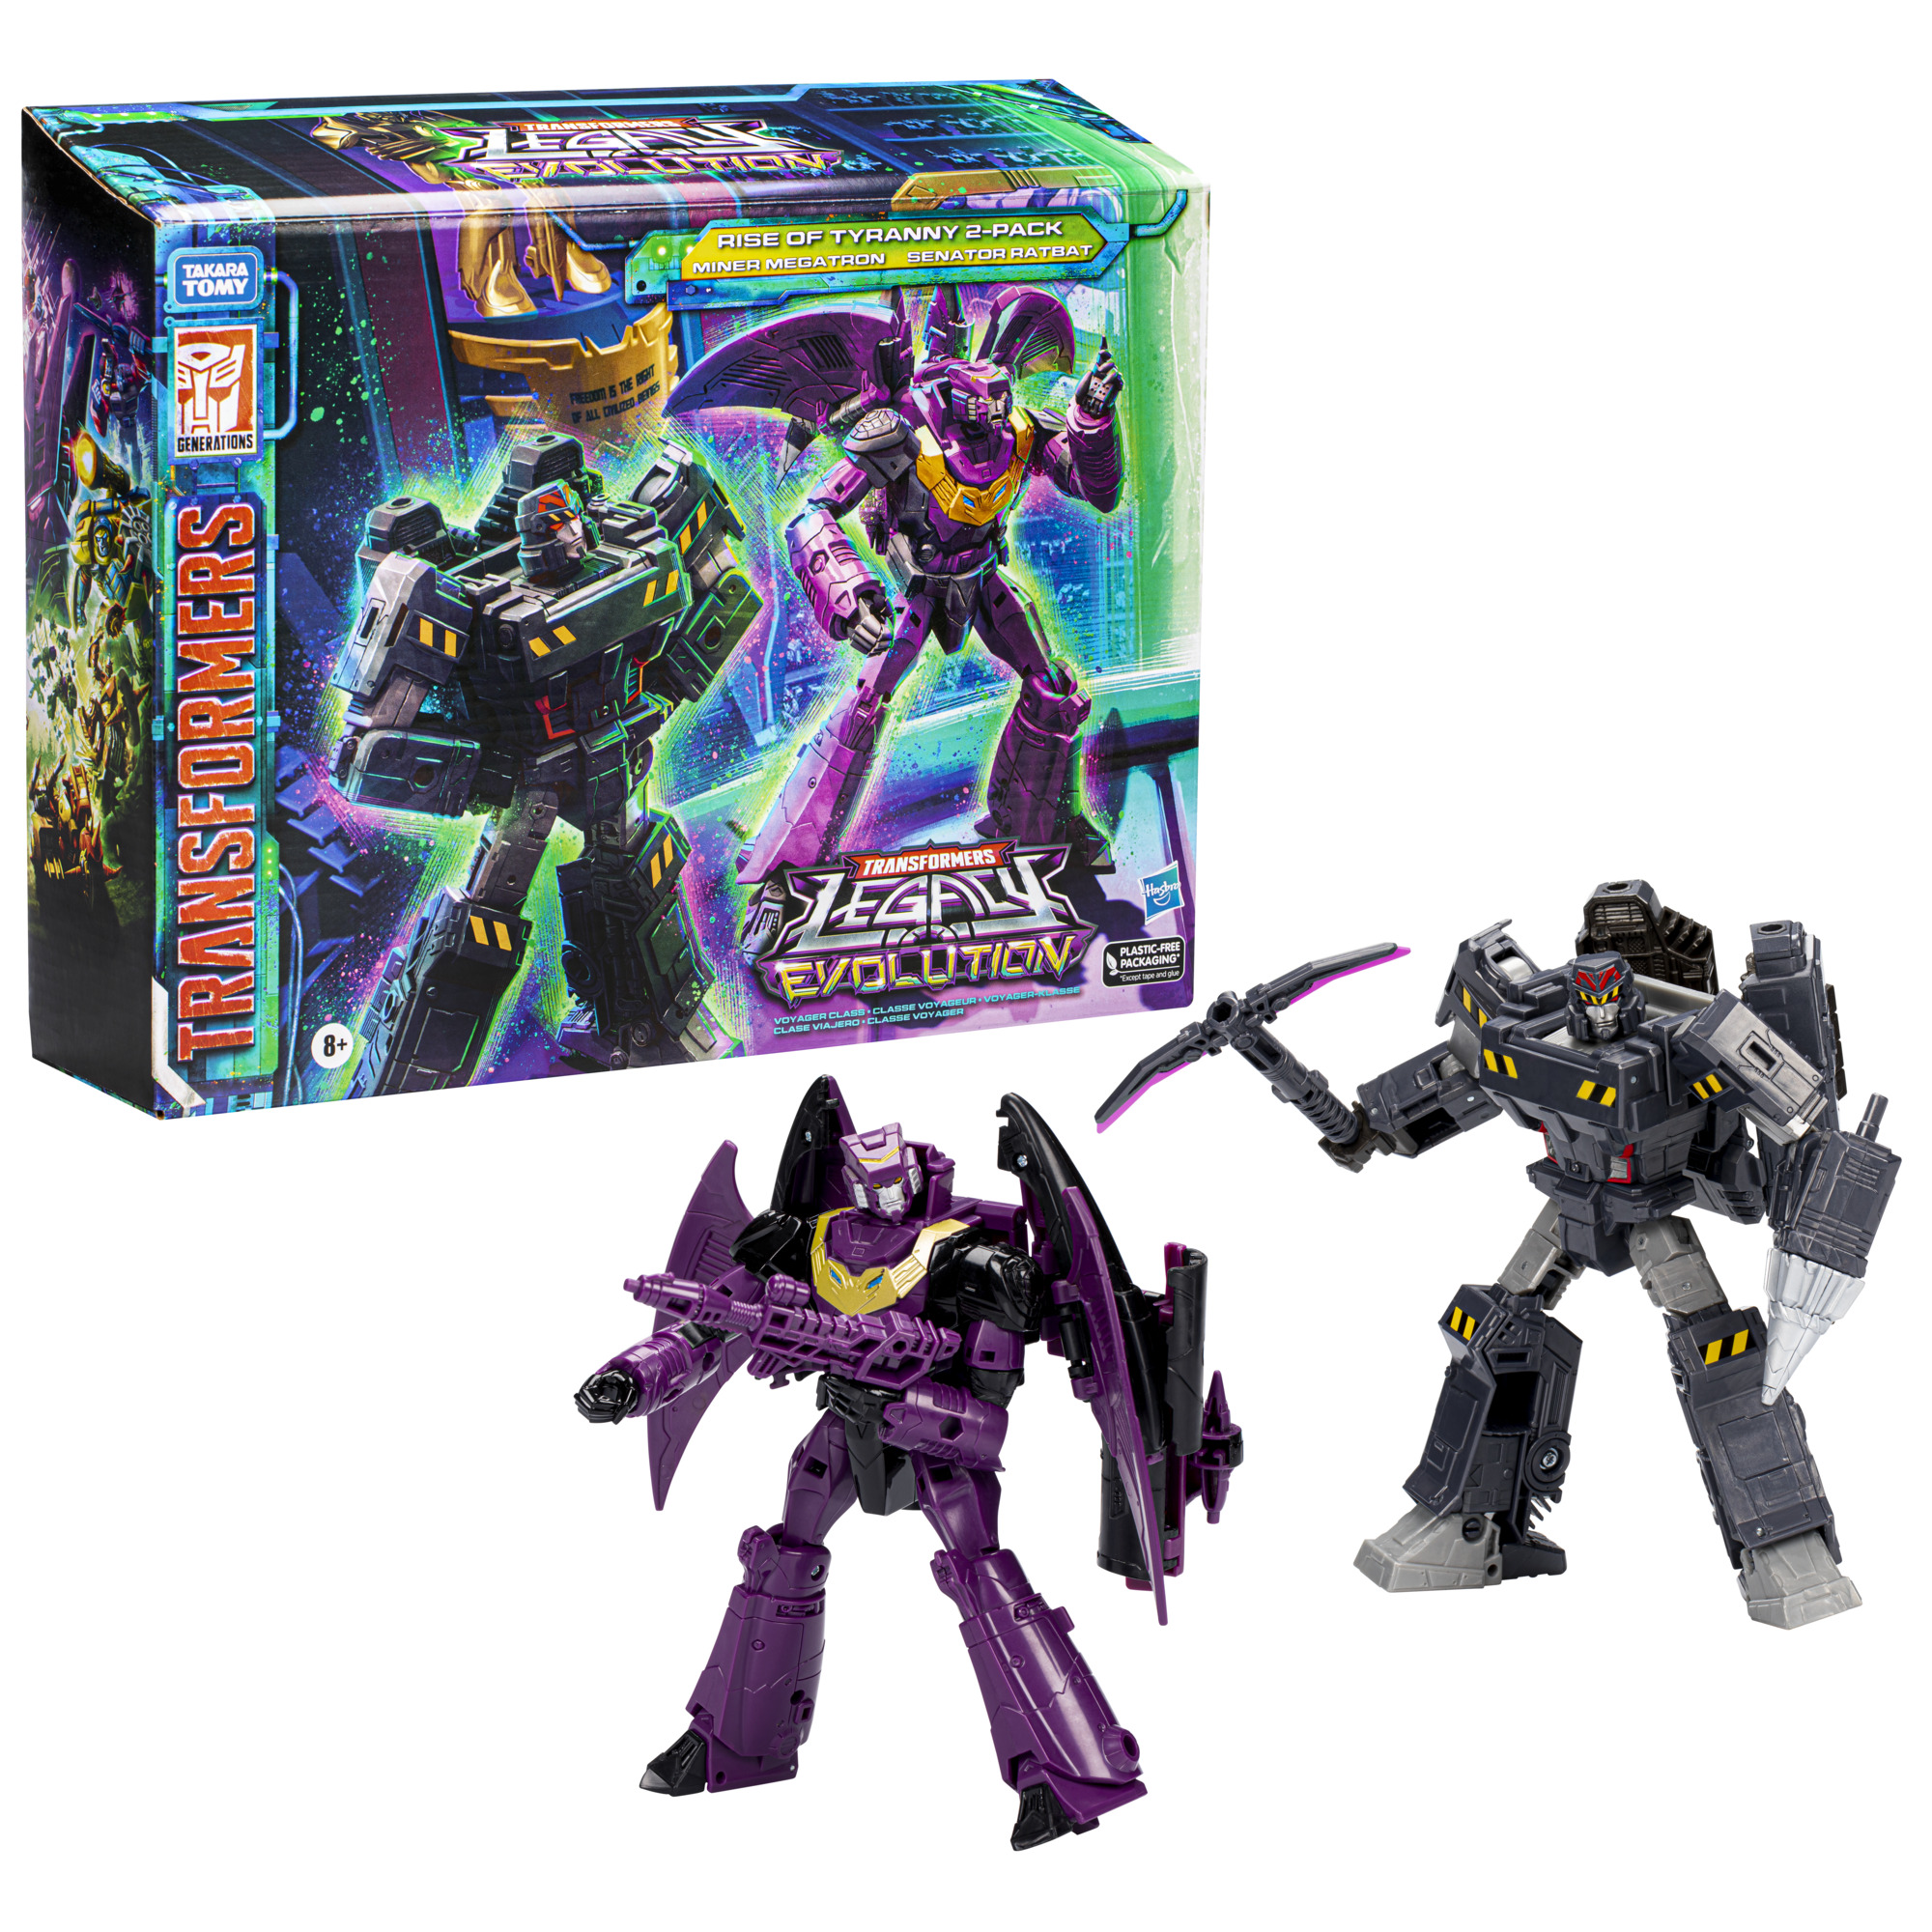 Transformers Legacy: Evolution Rise of Tyranny 2-Pack